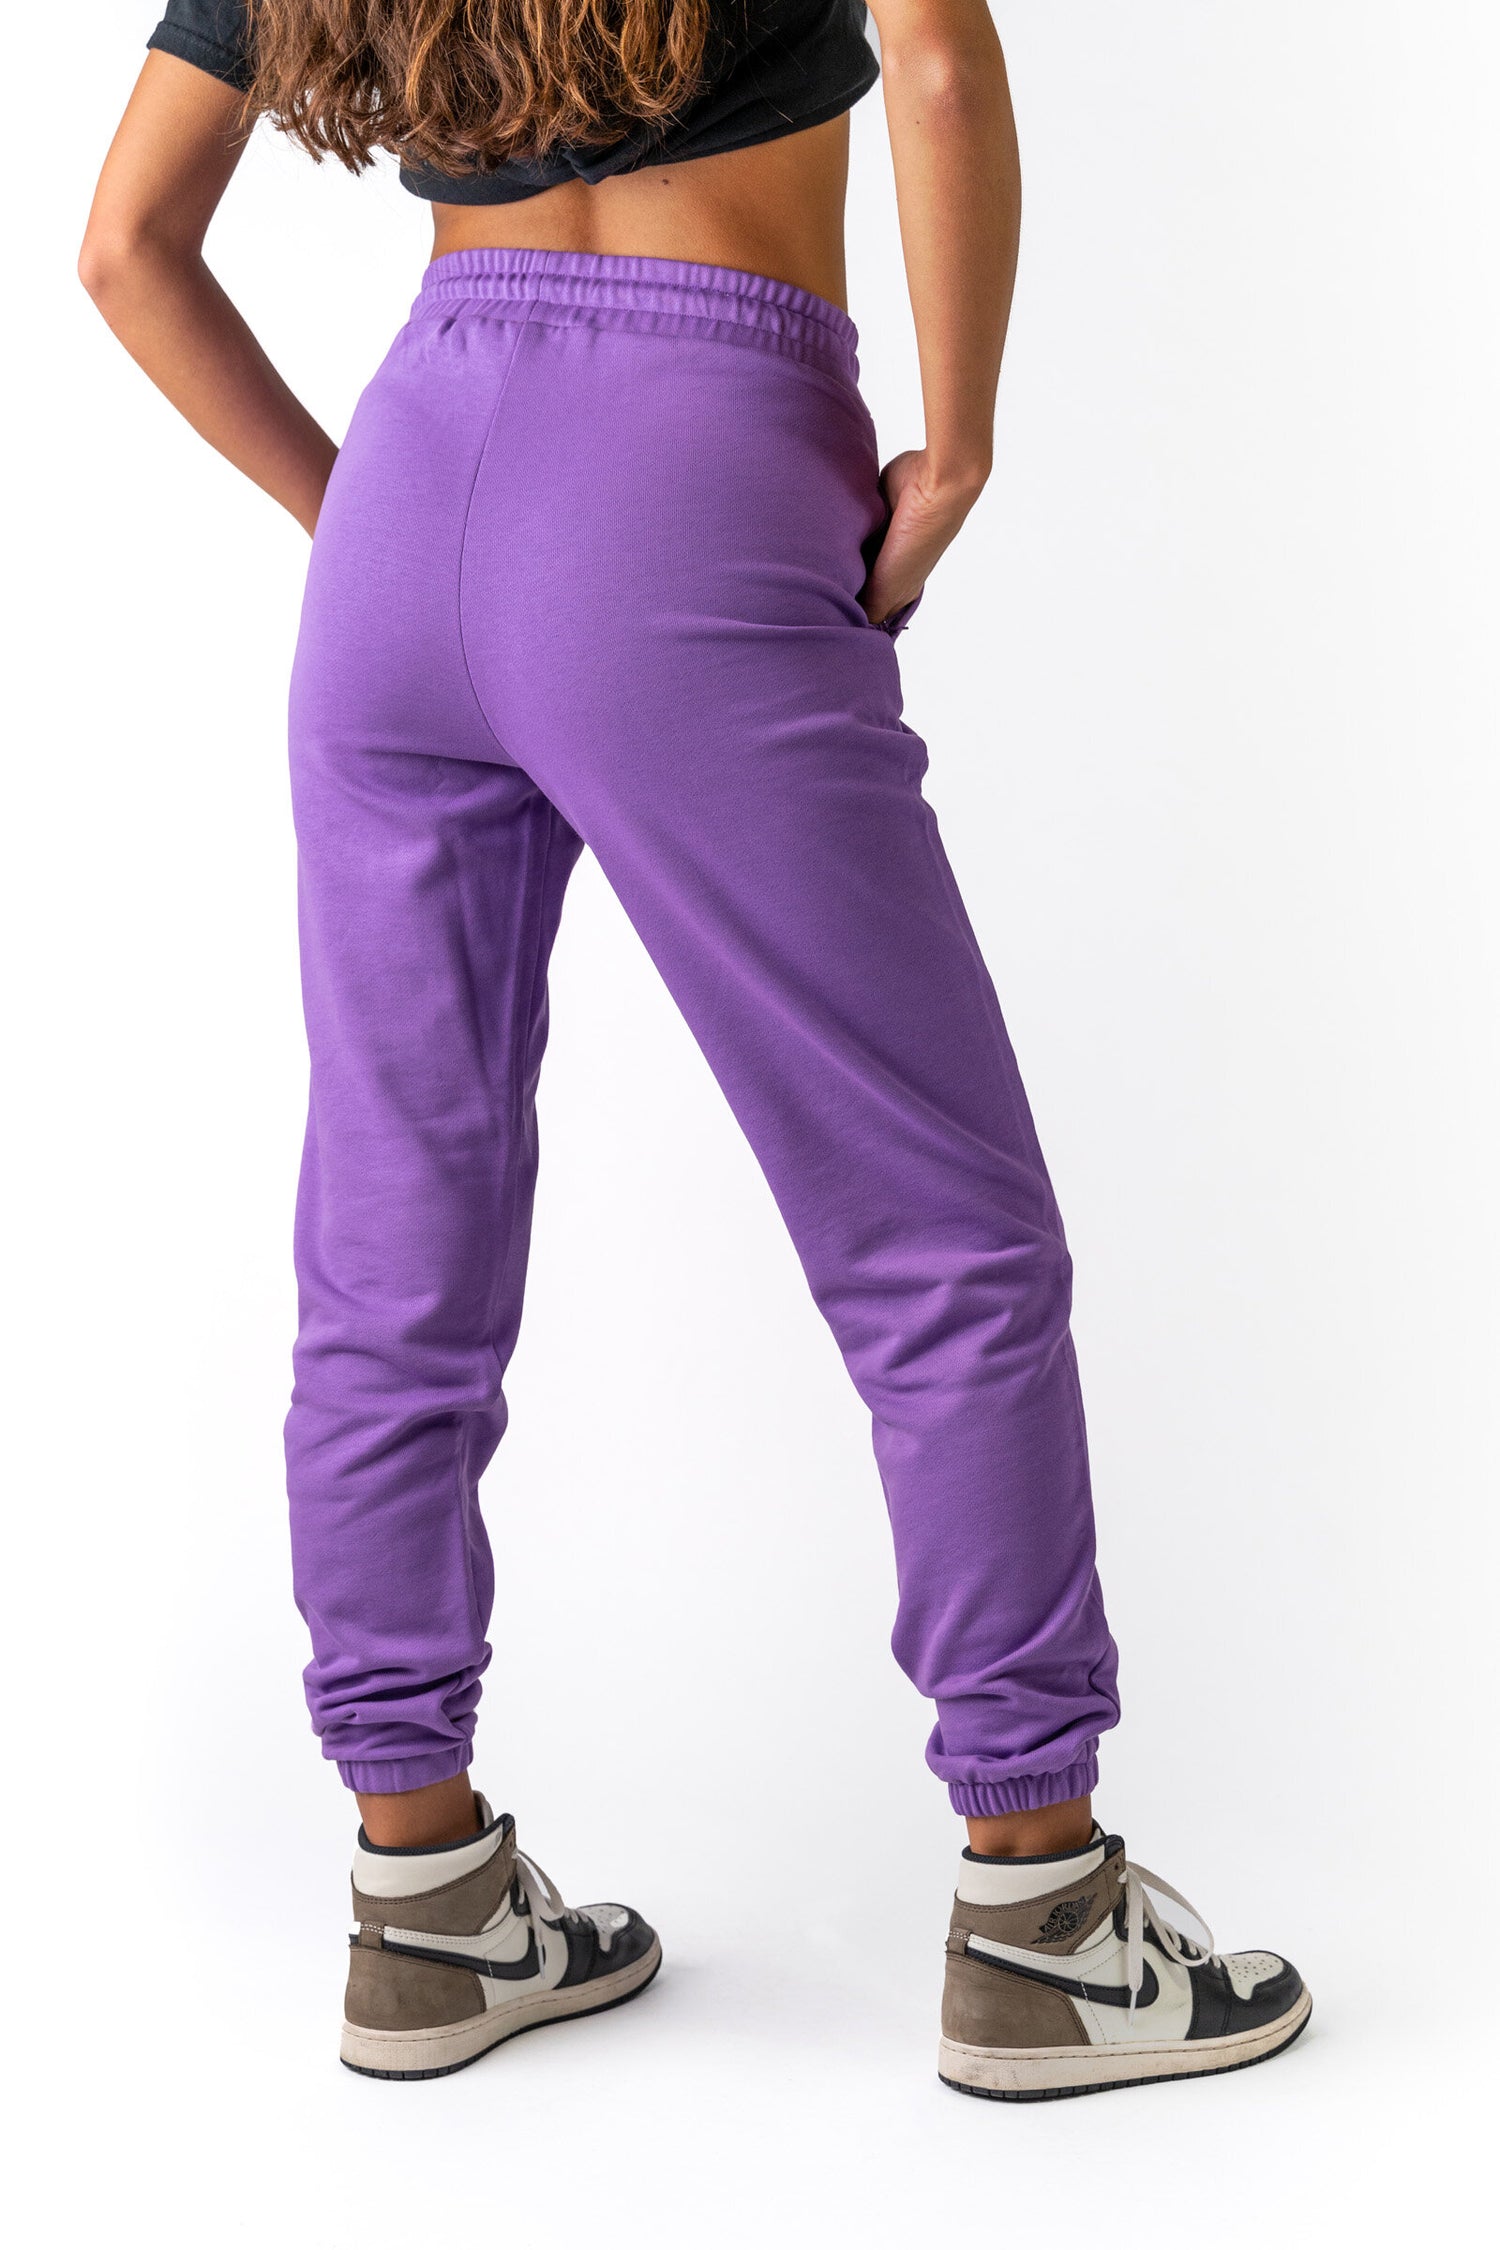 ECHT, Pants & Jumpsuits, Echt Velour Joggers High Rise In Lilac Like New  Size Medium Secure Pockets